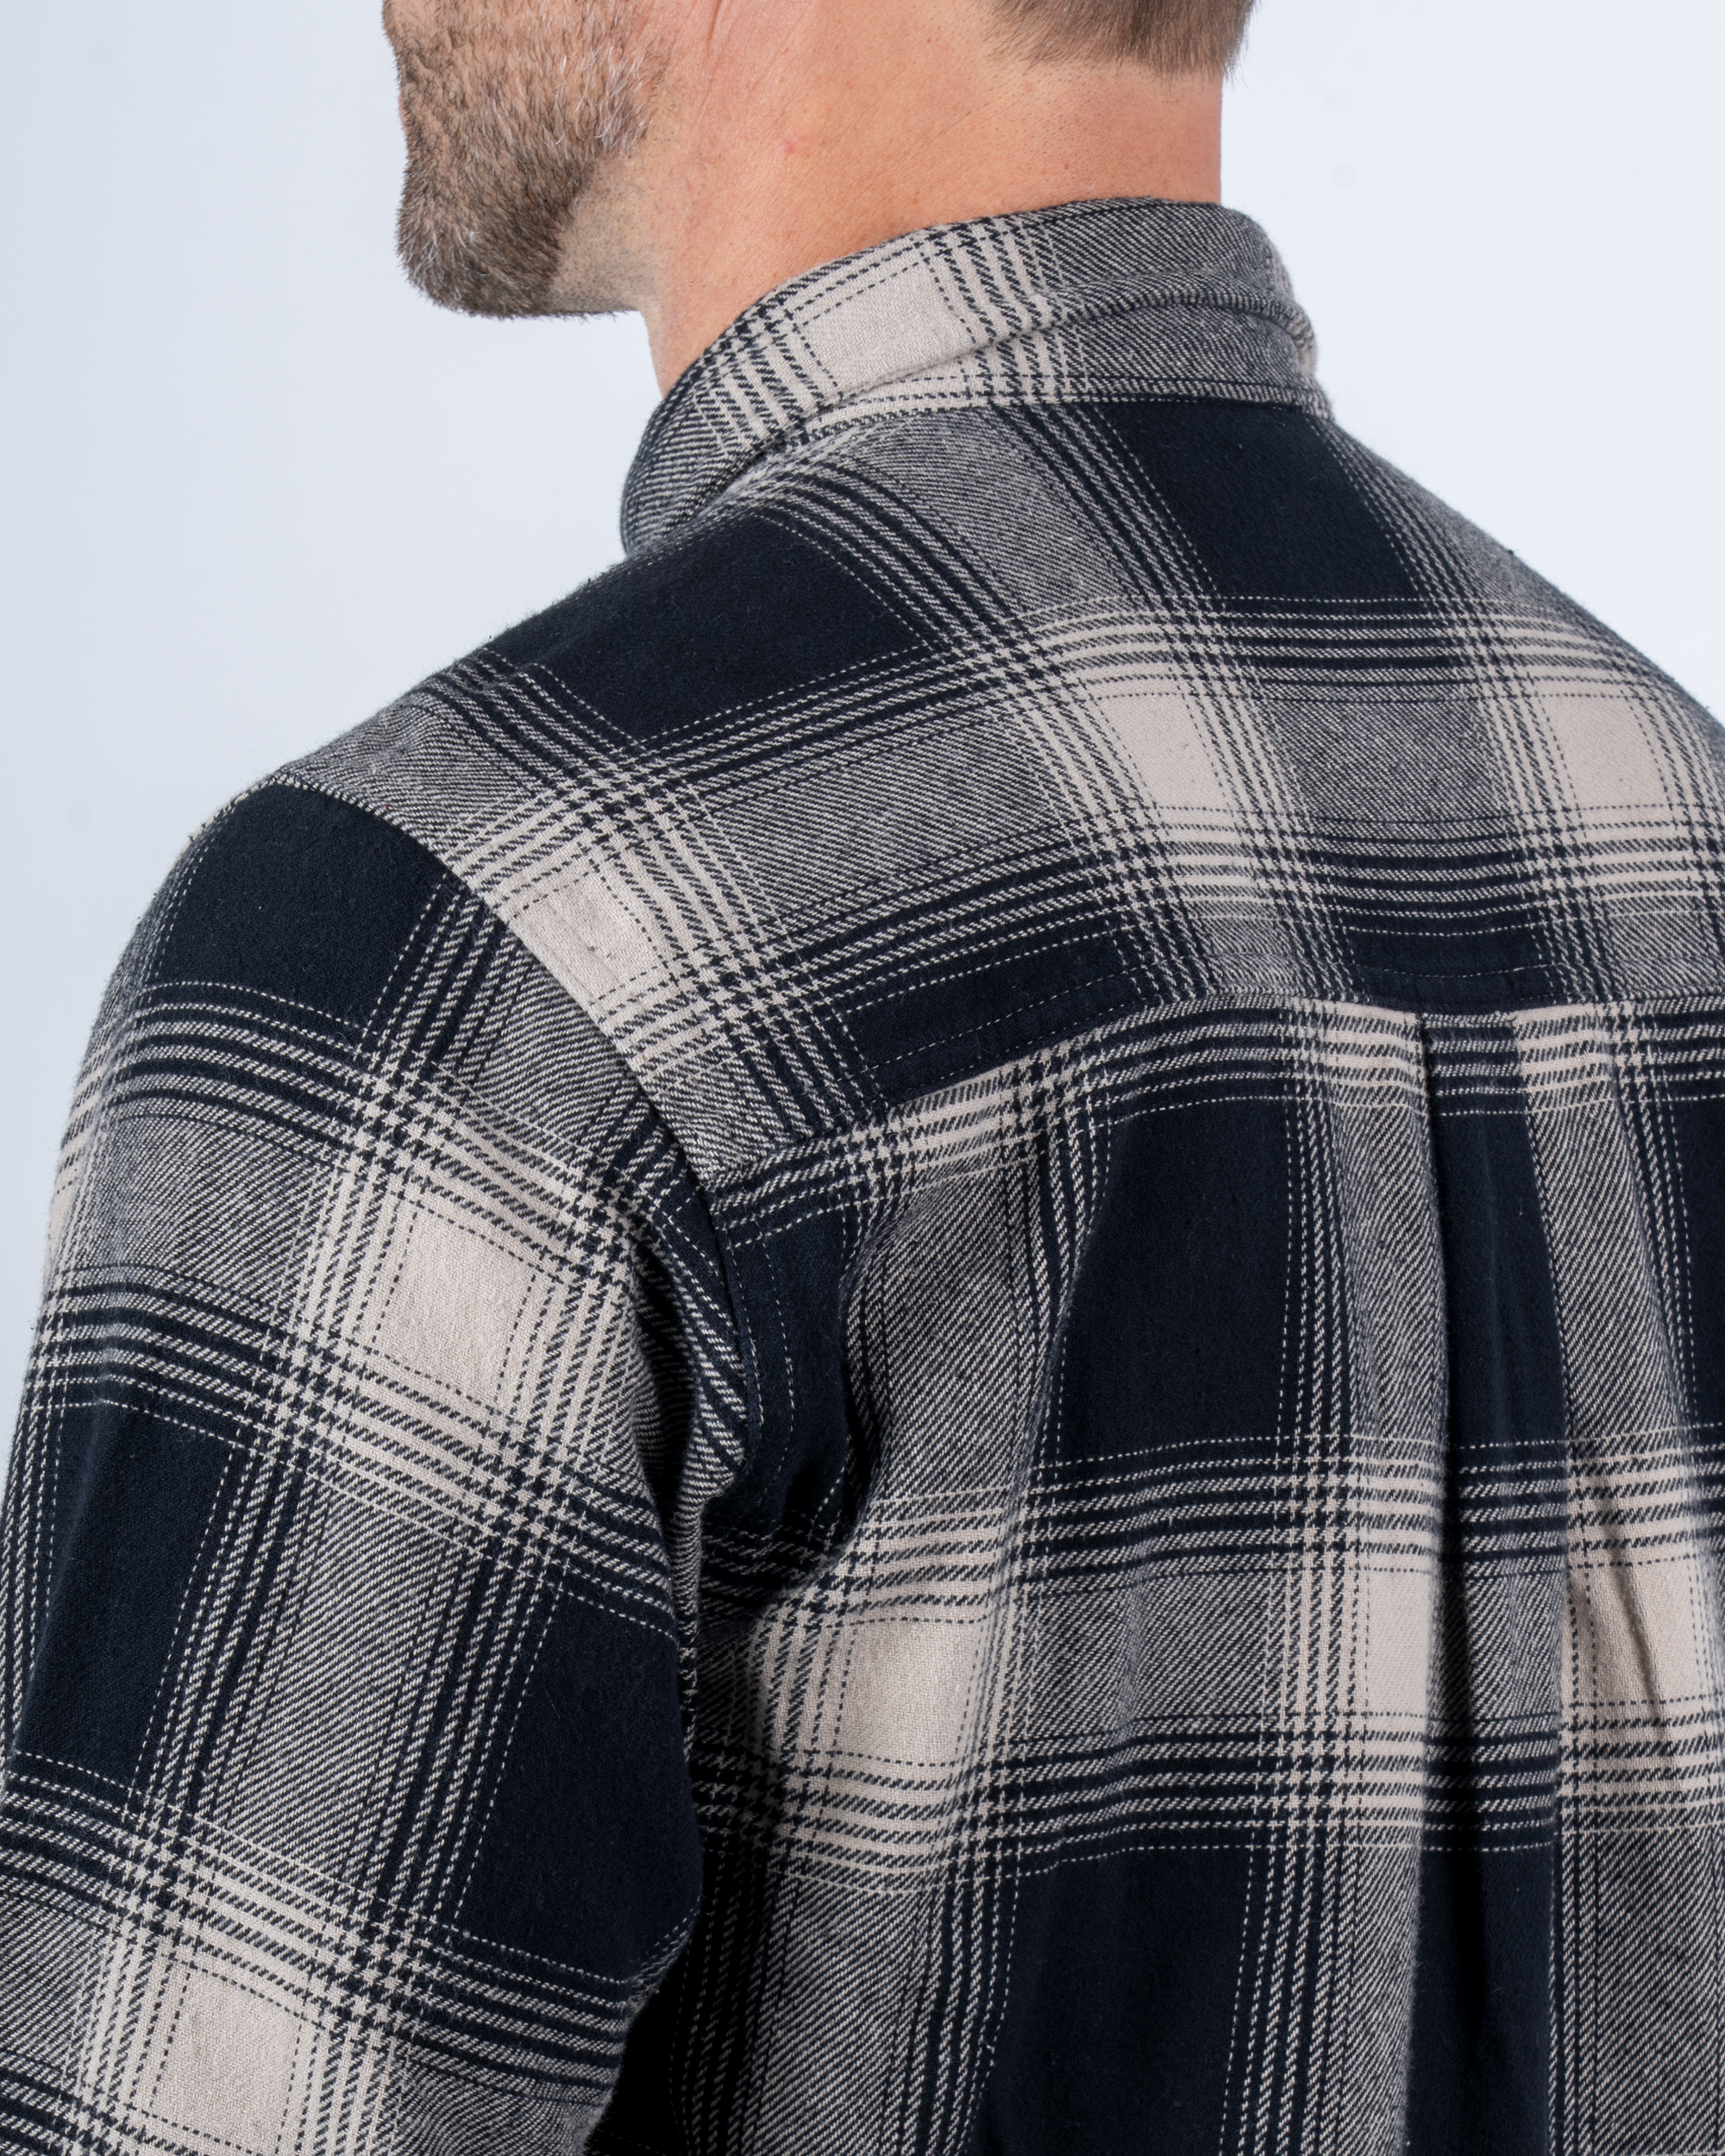 Foreign Rider Co Organic Cotton Black Flannel Plaid Long Sleeve Button Up Shirt Back Shoulder and Collar Detail